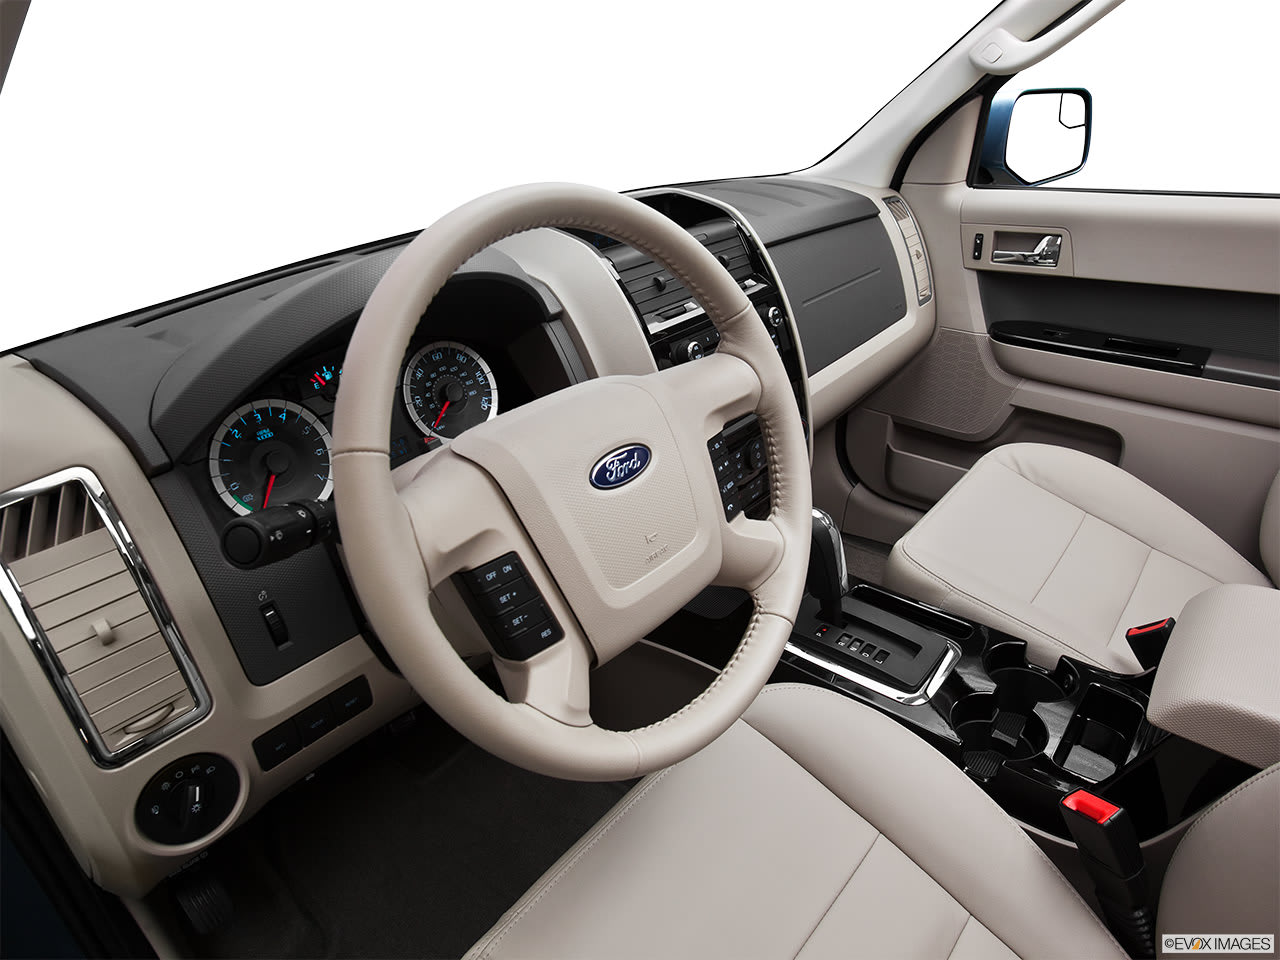 A Buyer's Guide to the 2012 Ford Escape Hybrid | YourMechanic Advice